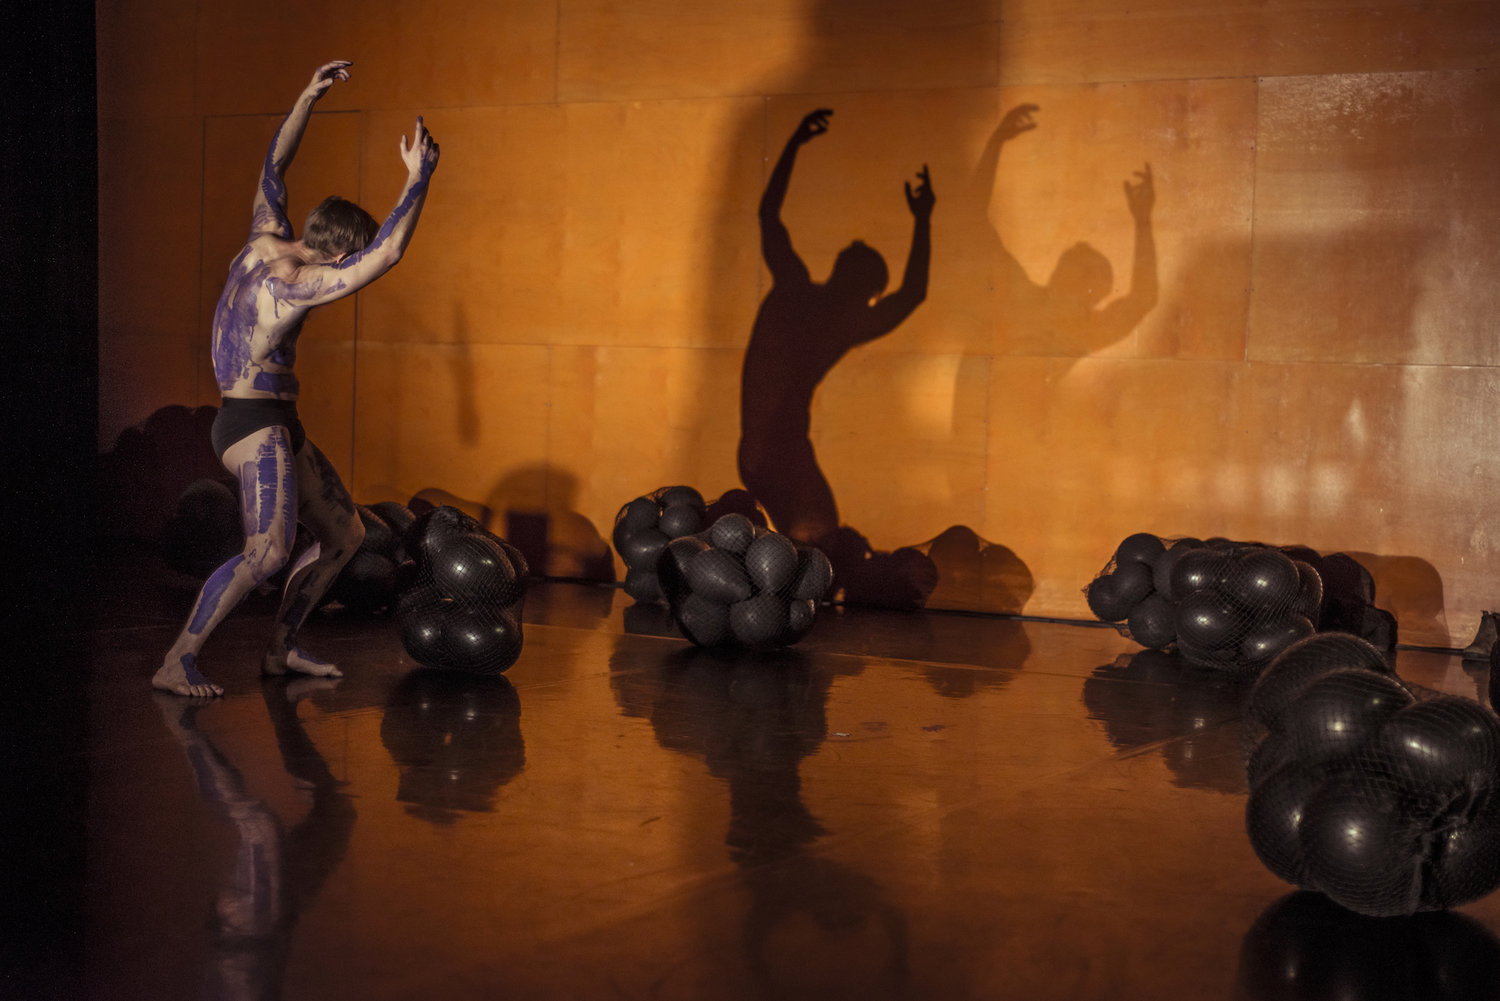 Joel Bray performing in Dharawungara. He is wearing small black trunks and his body is covered in large purple paint strokes. He is creating a shadow on the wall and there are groups of black balloons tied in nets around him on the floor.